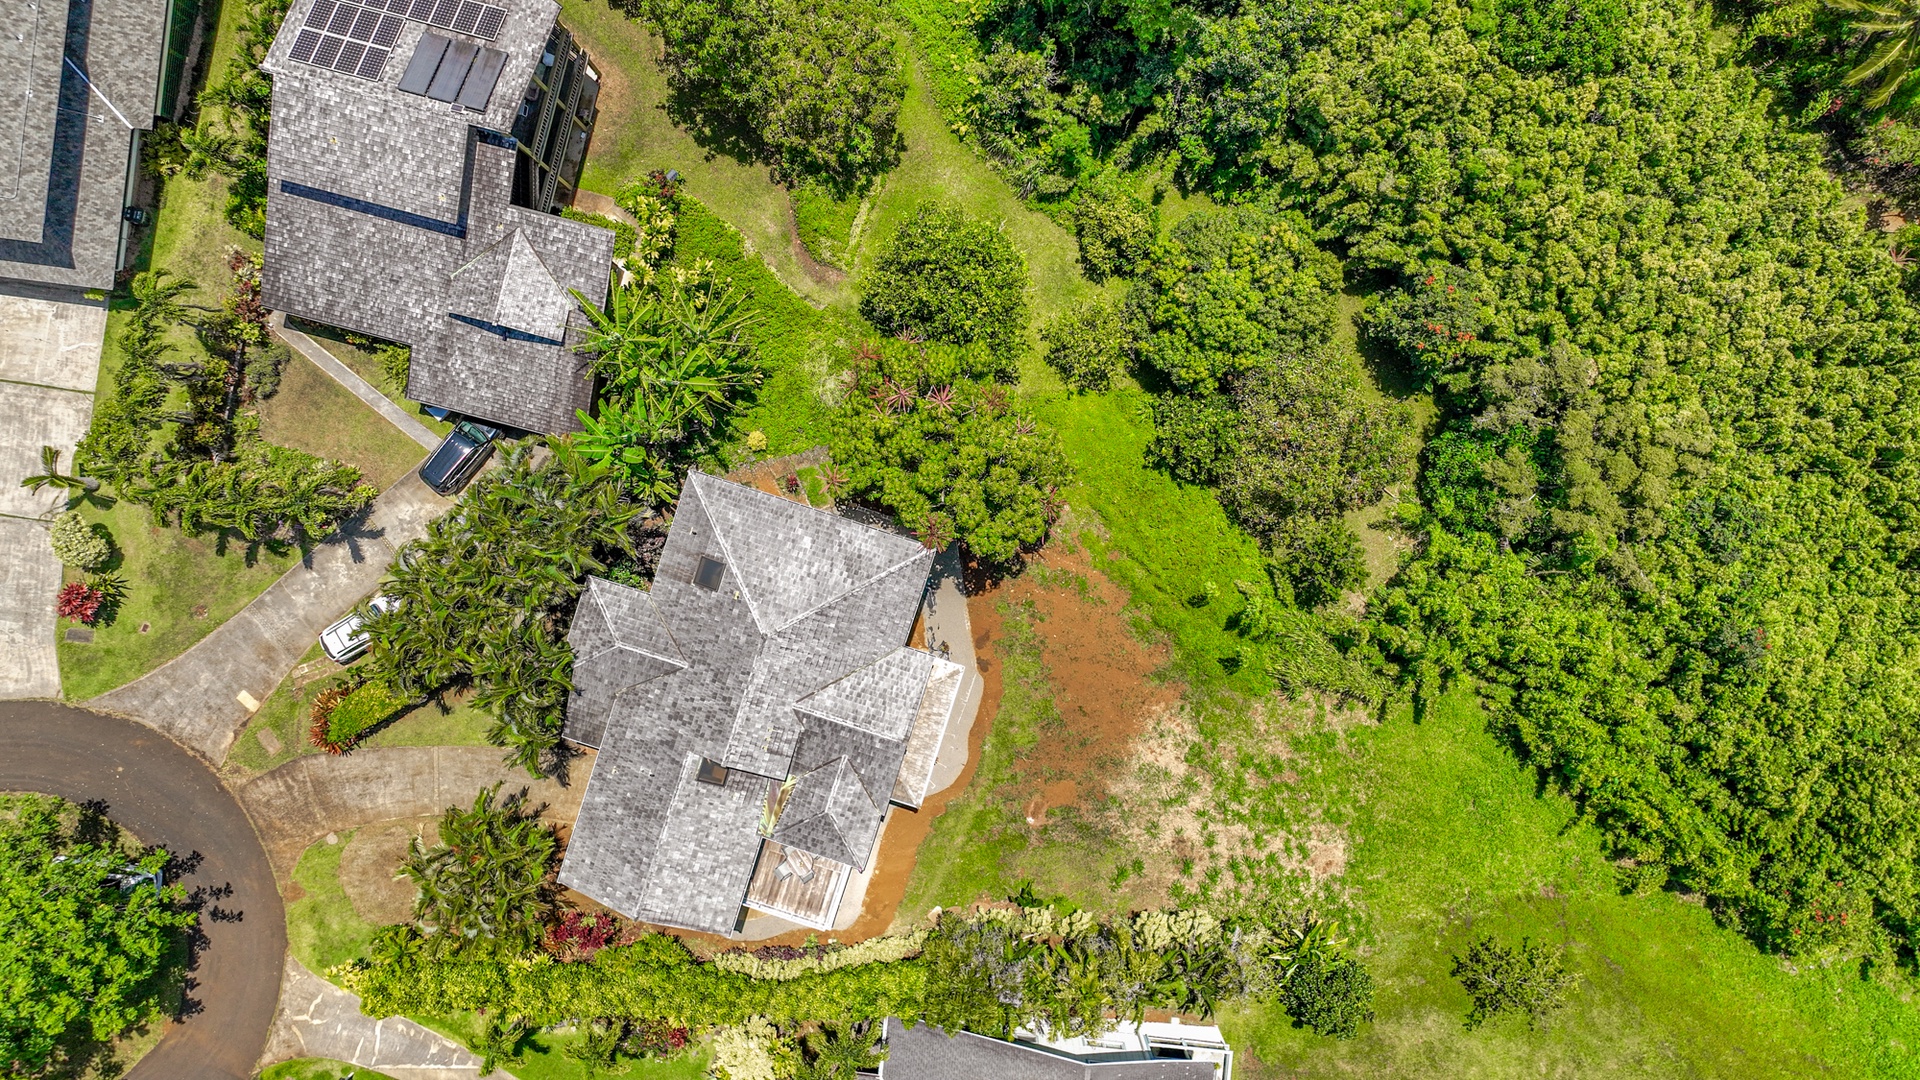 Princeville Vacation Rentals, Wai Lani - Brid's eye view of your getaway home.